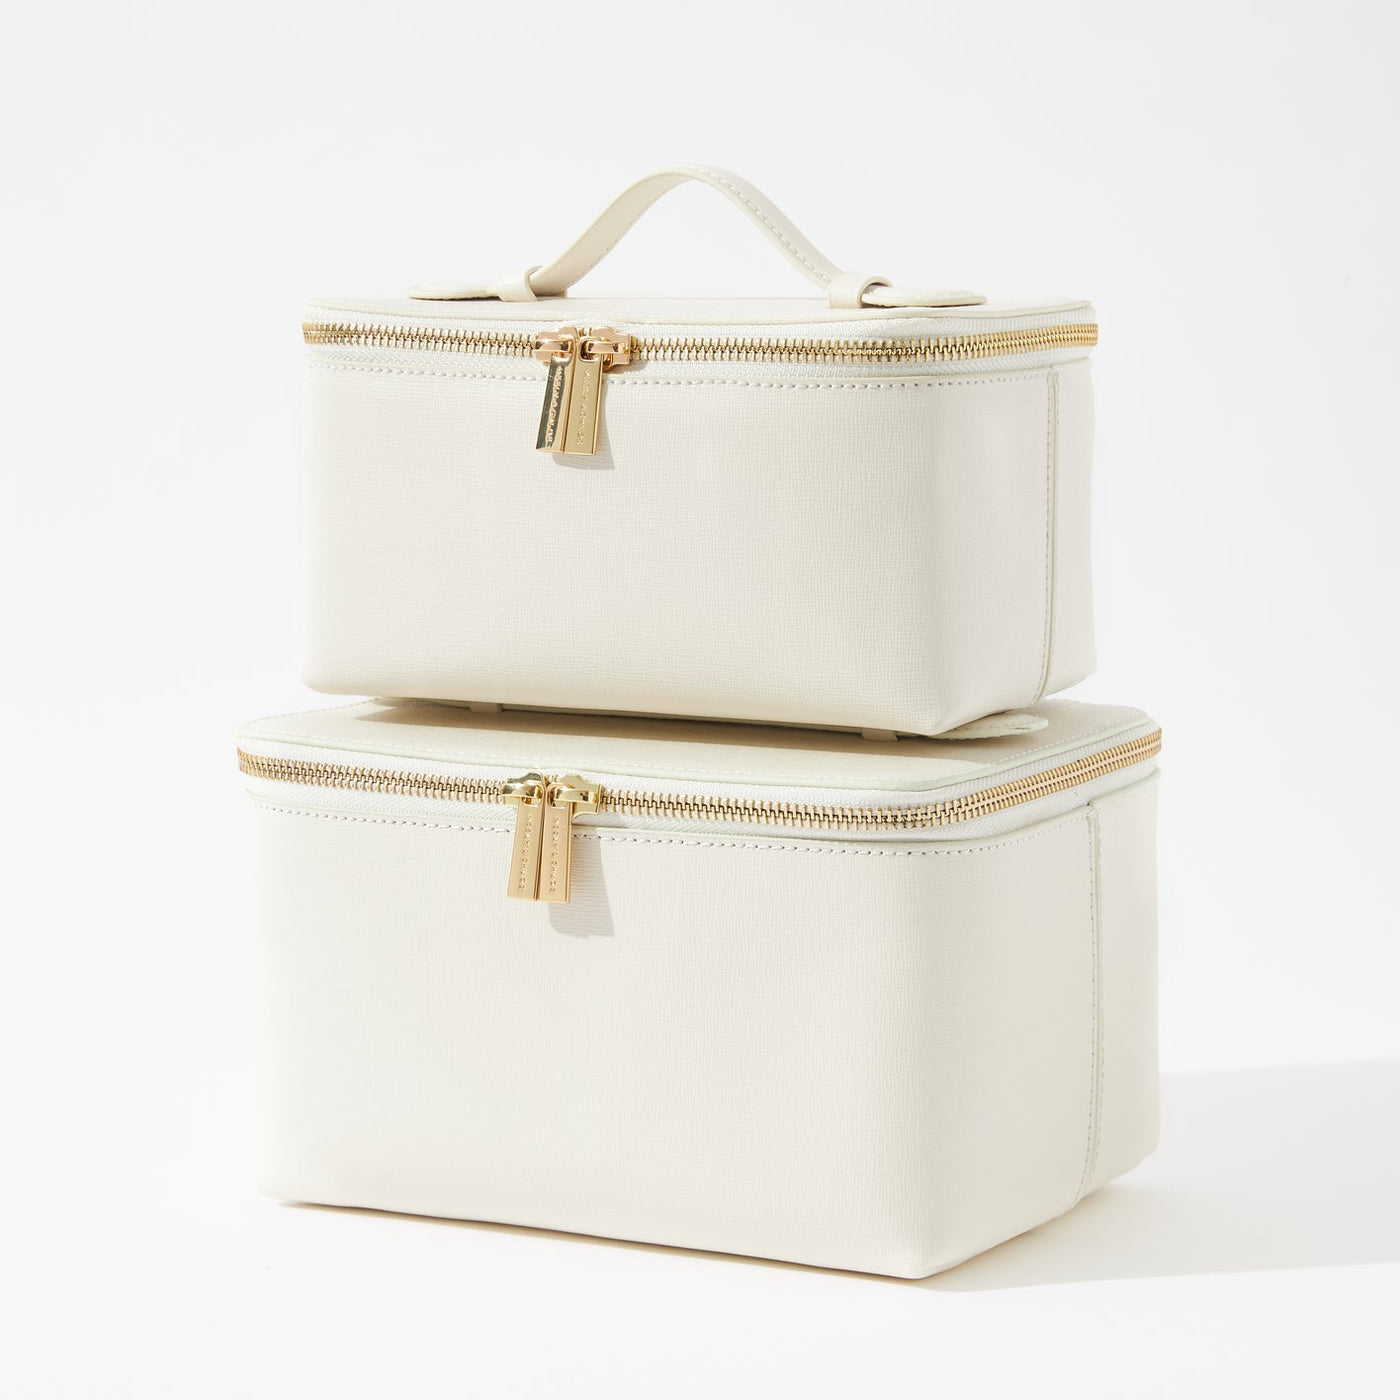 No. 41 The Large Vanity Case - White Saffiano Leather